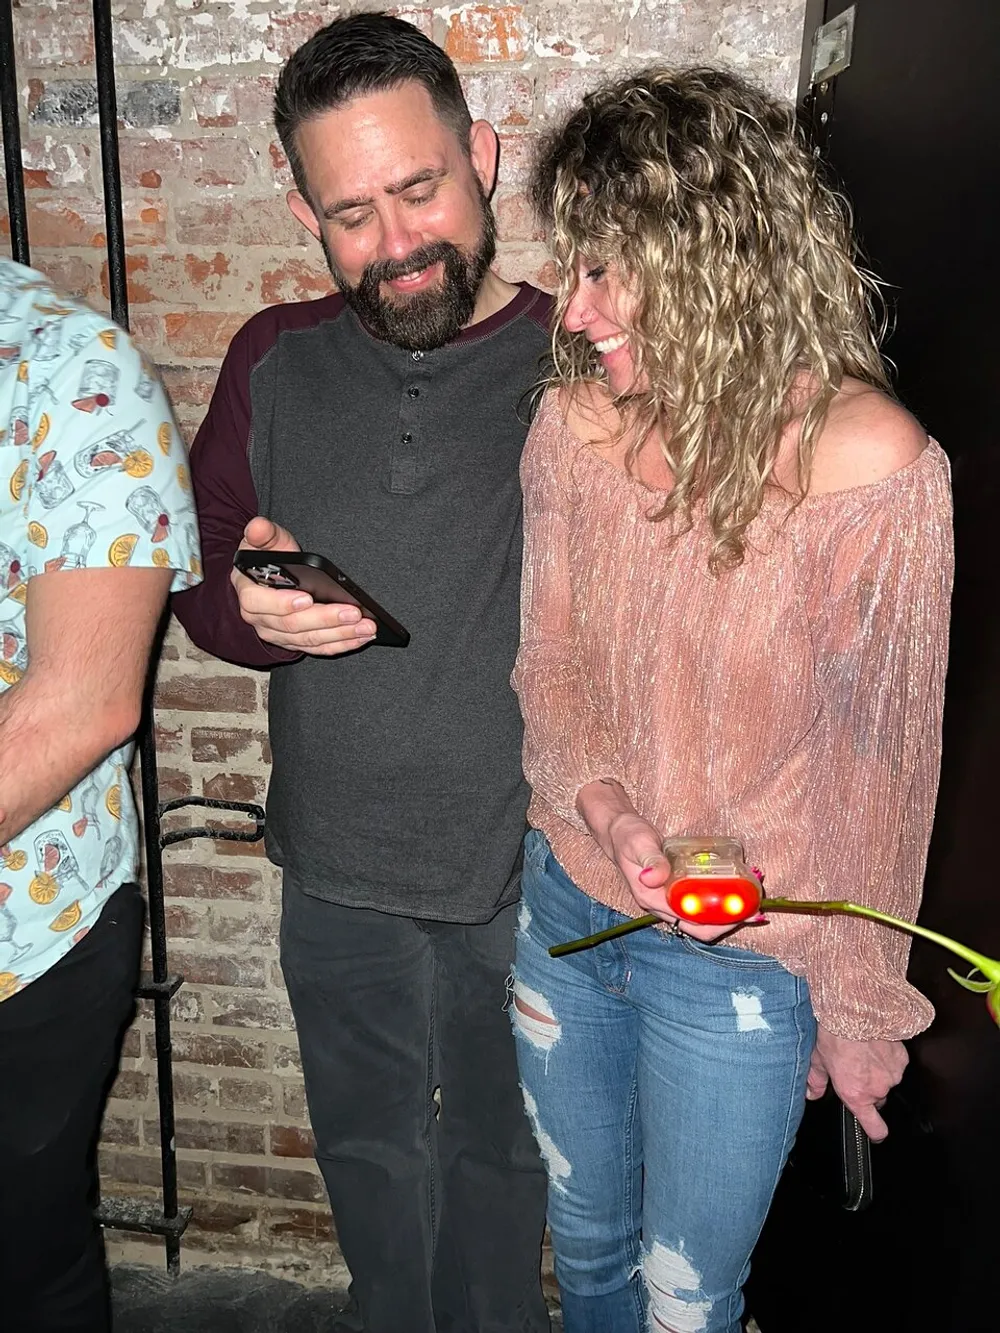 Two people share a moment of laughter while looking at a smartphone with the person on the right holding a toy with glowing red lights